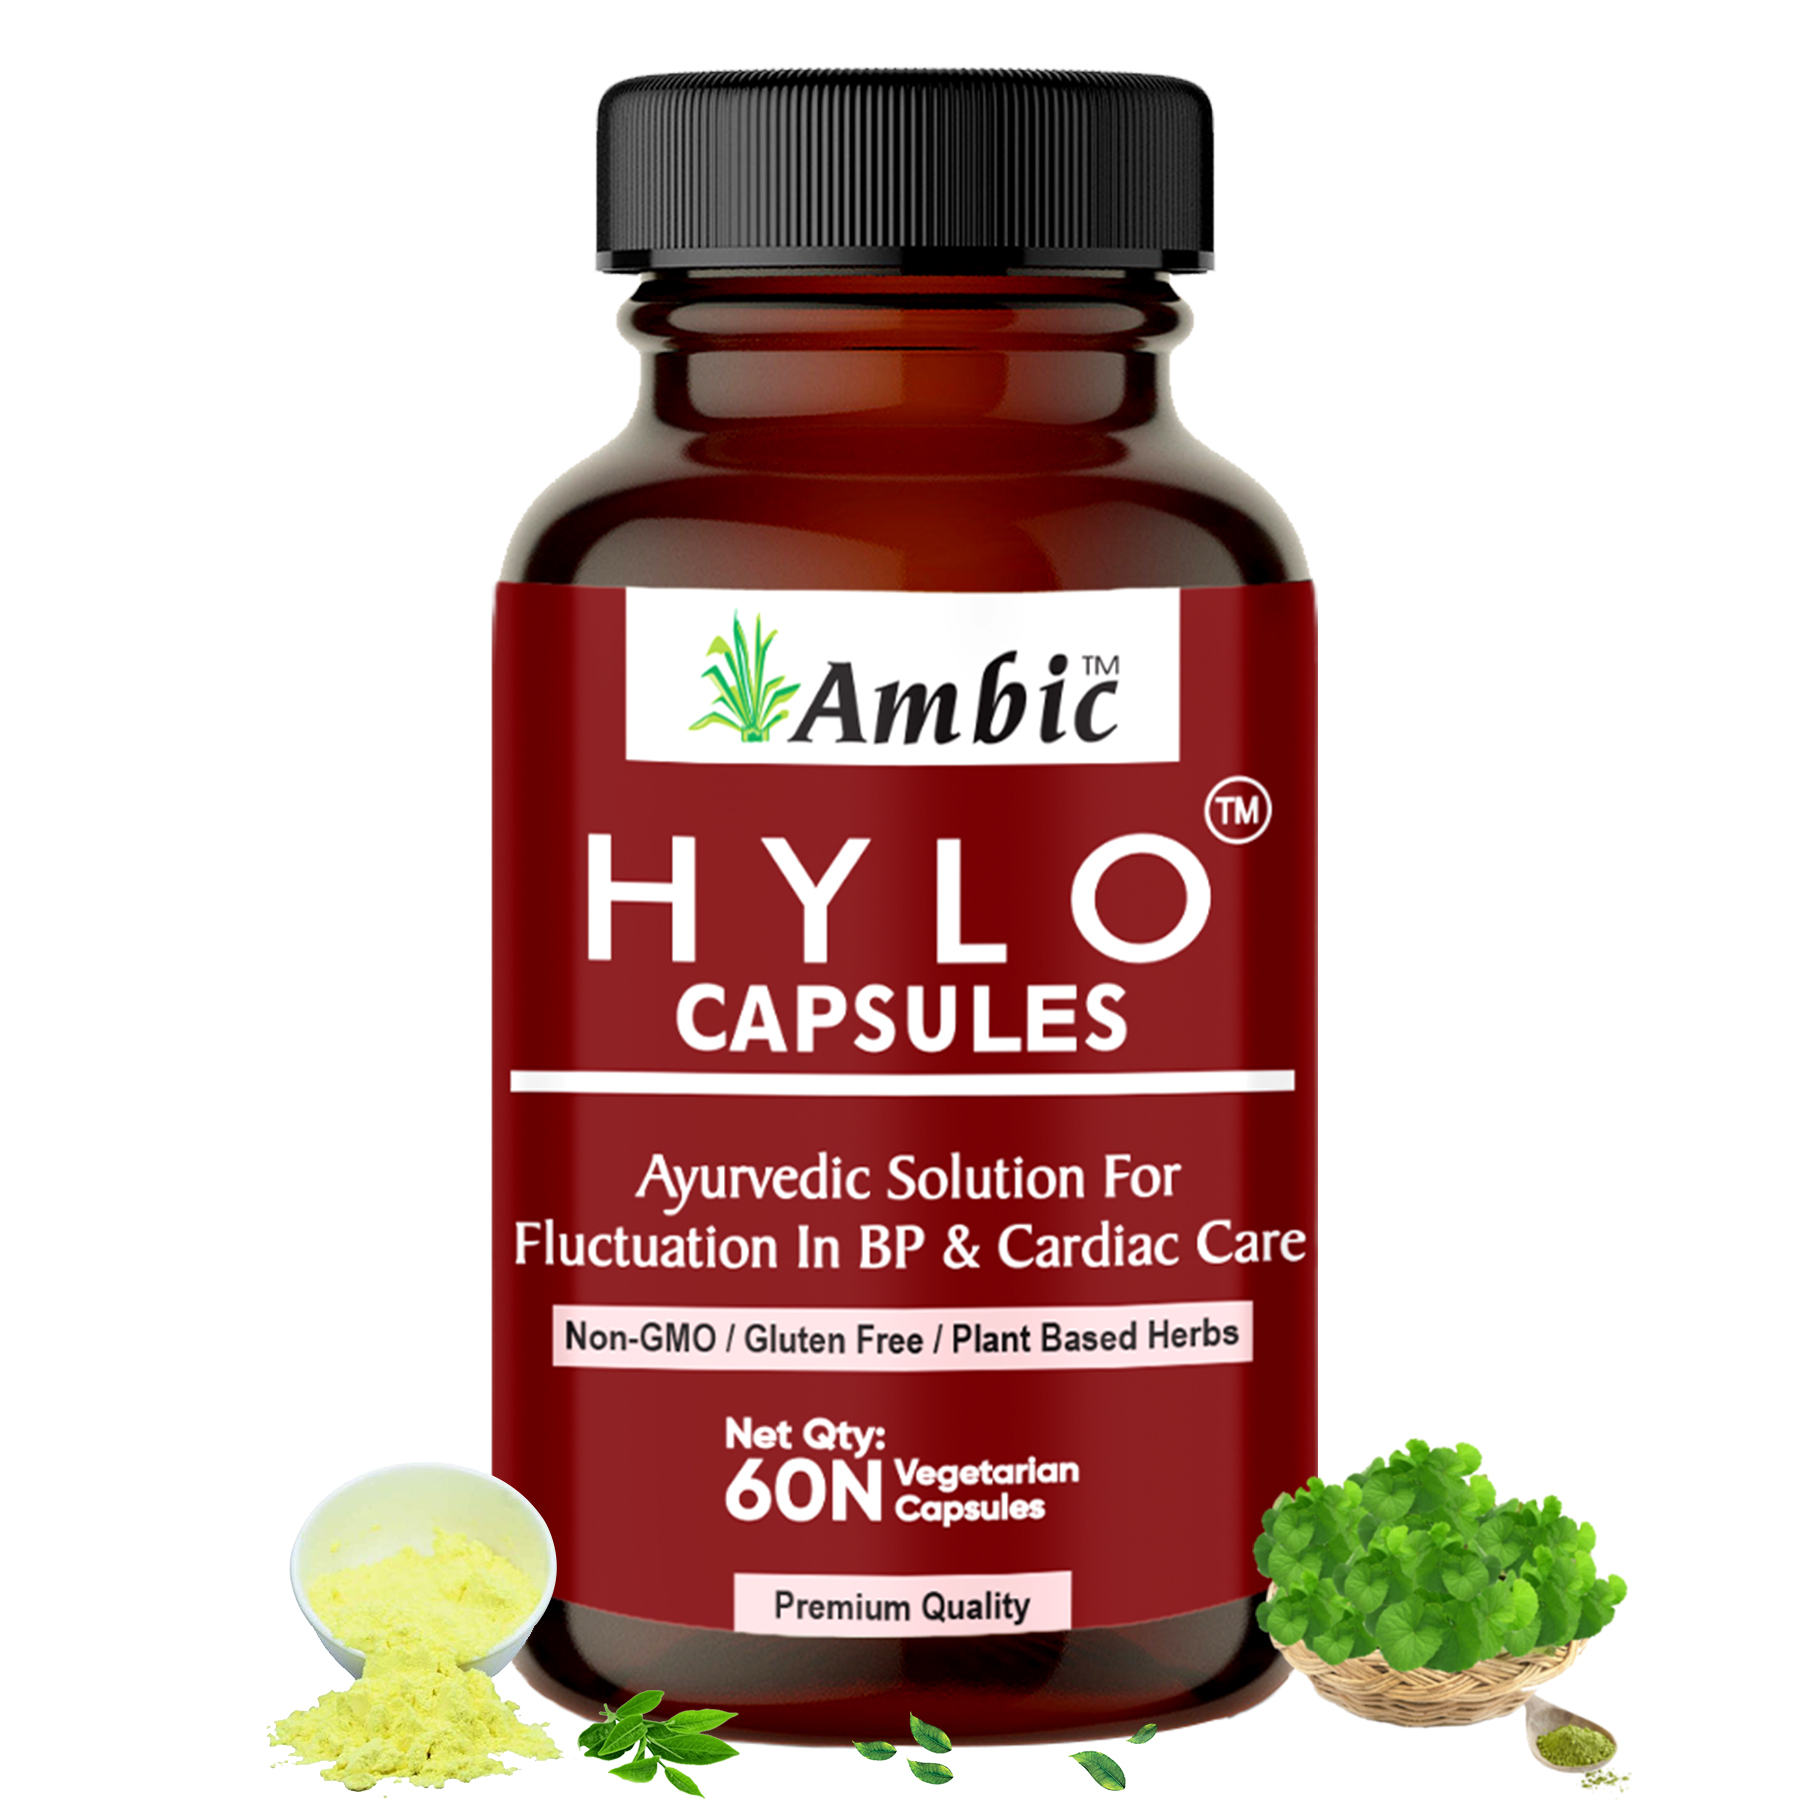 Hylo Capsules Ayurvedic solution for fluctuation in BP & cardiac care front